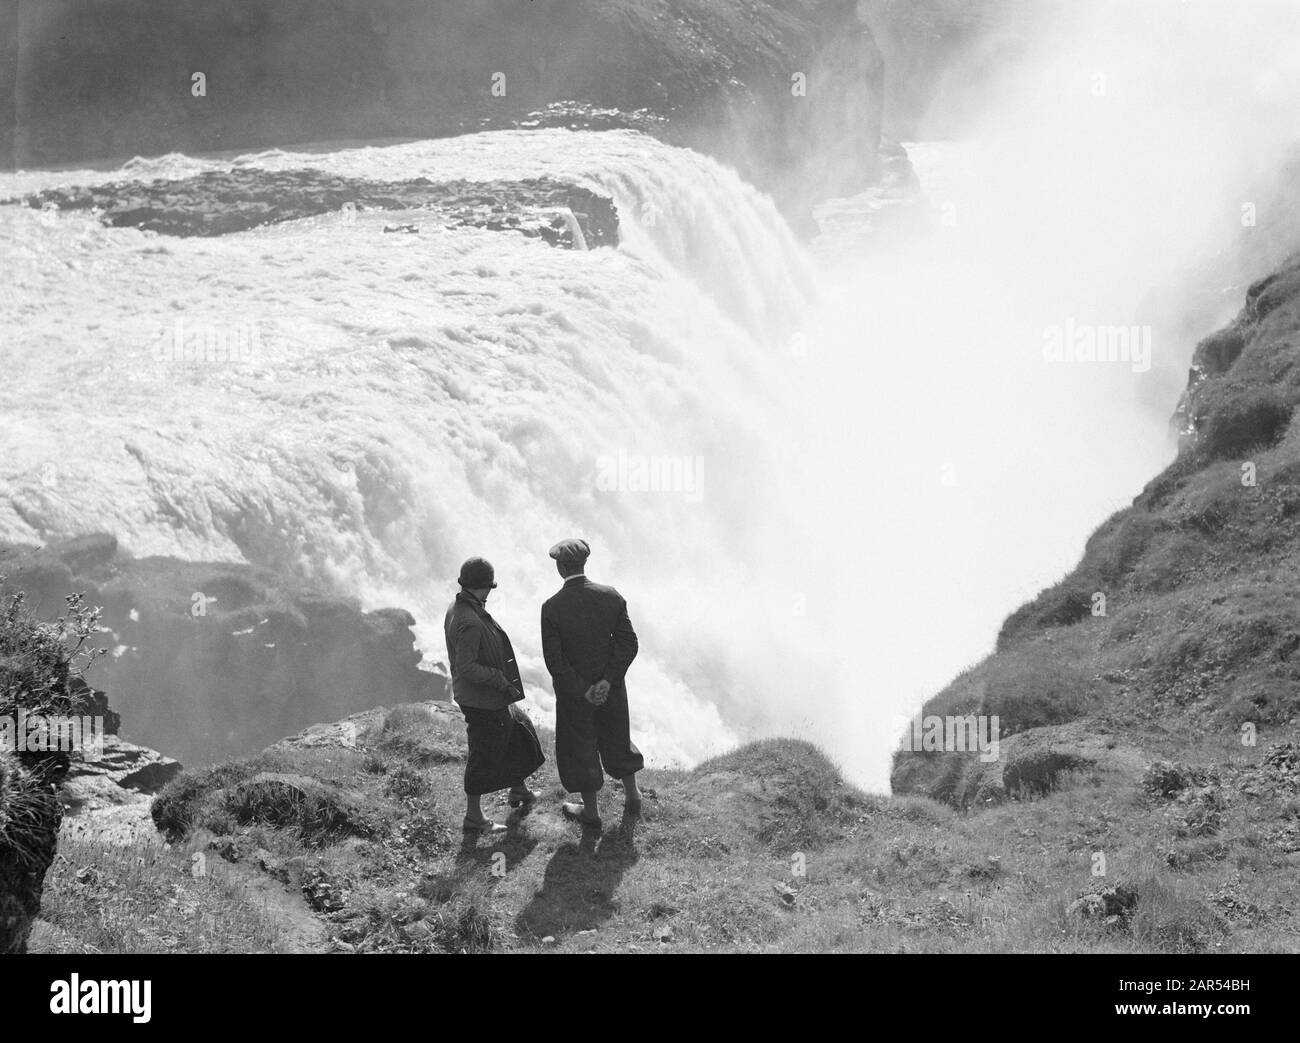 Iceland  Gullfoss. The journalist Anita Joachim together with the Icelandic guide Jonsson at the waterfalls in the Hvítá (White River) in South Iceland Date: 1934 Location: Gullfoss, Iceland Keywords: guides, hills, journalists, landscapes, rivers, waterfalls Stock Photo